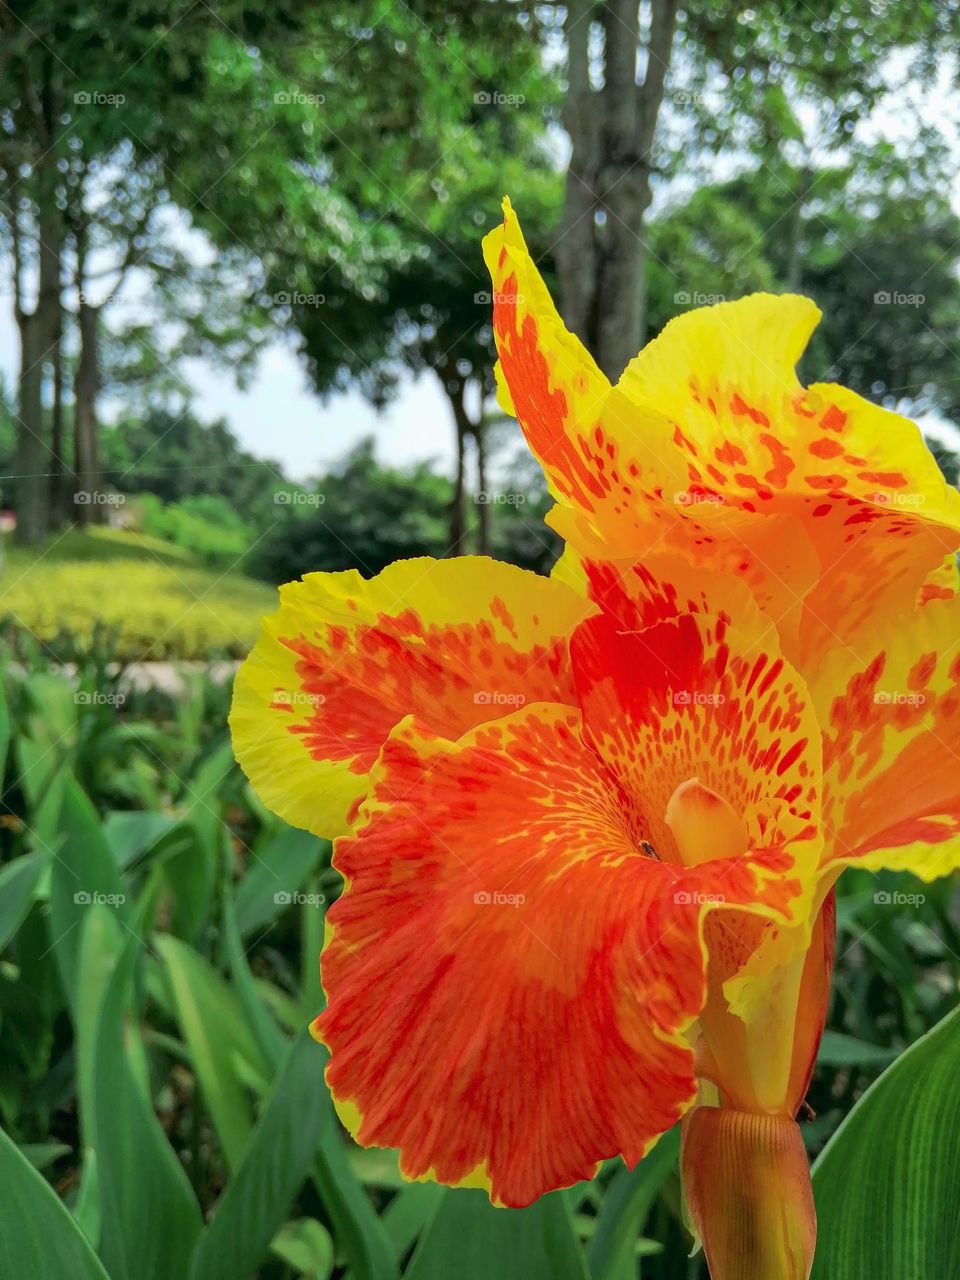 Canna hybrida cultivar with orange flowers mottled red in center, rhizomatous perennial herb with broad green leaves and showy flowers in terminal spike in various colours, this one with orange and yellow